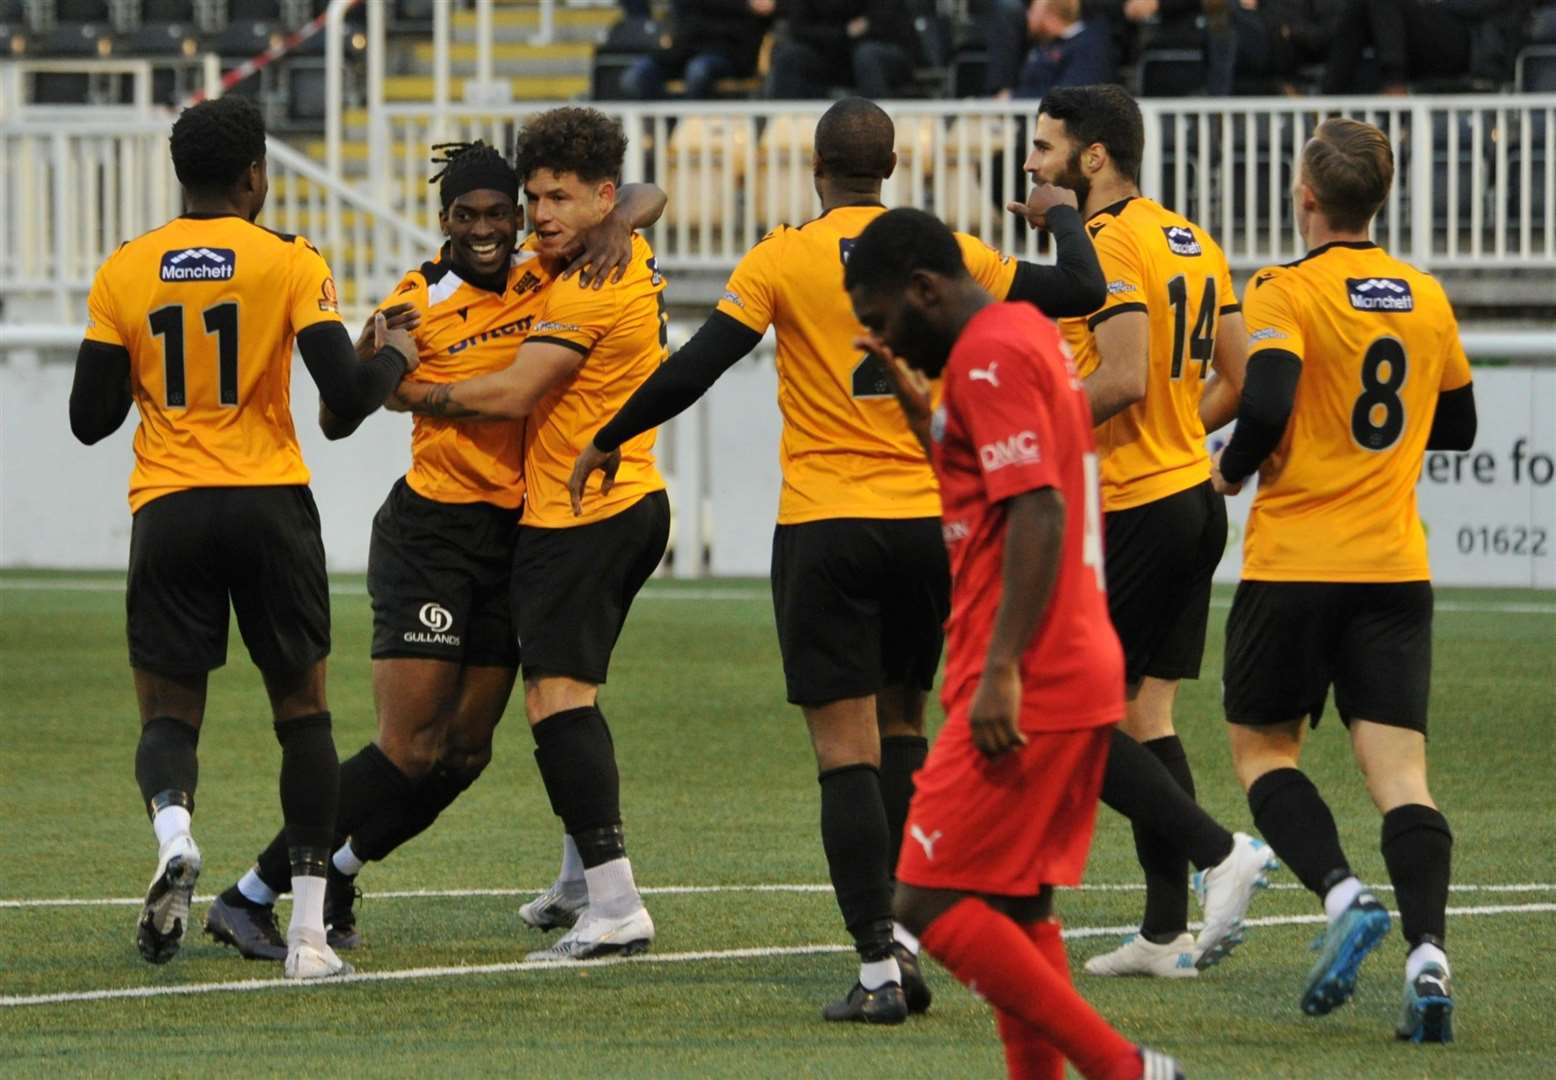 Ibrahim Olutade celebrates his goal with Maidstone team-mates Billericay Picture: Steve Terrell